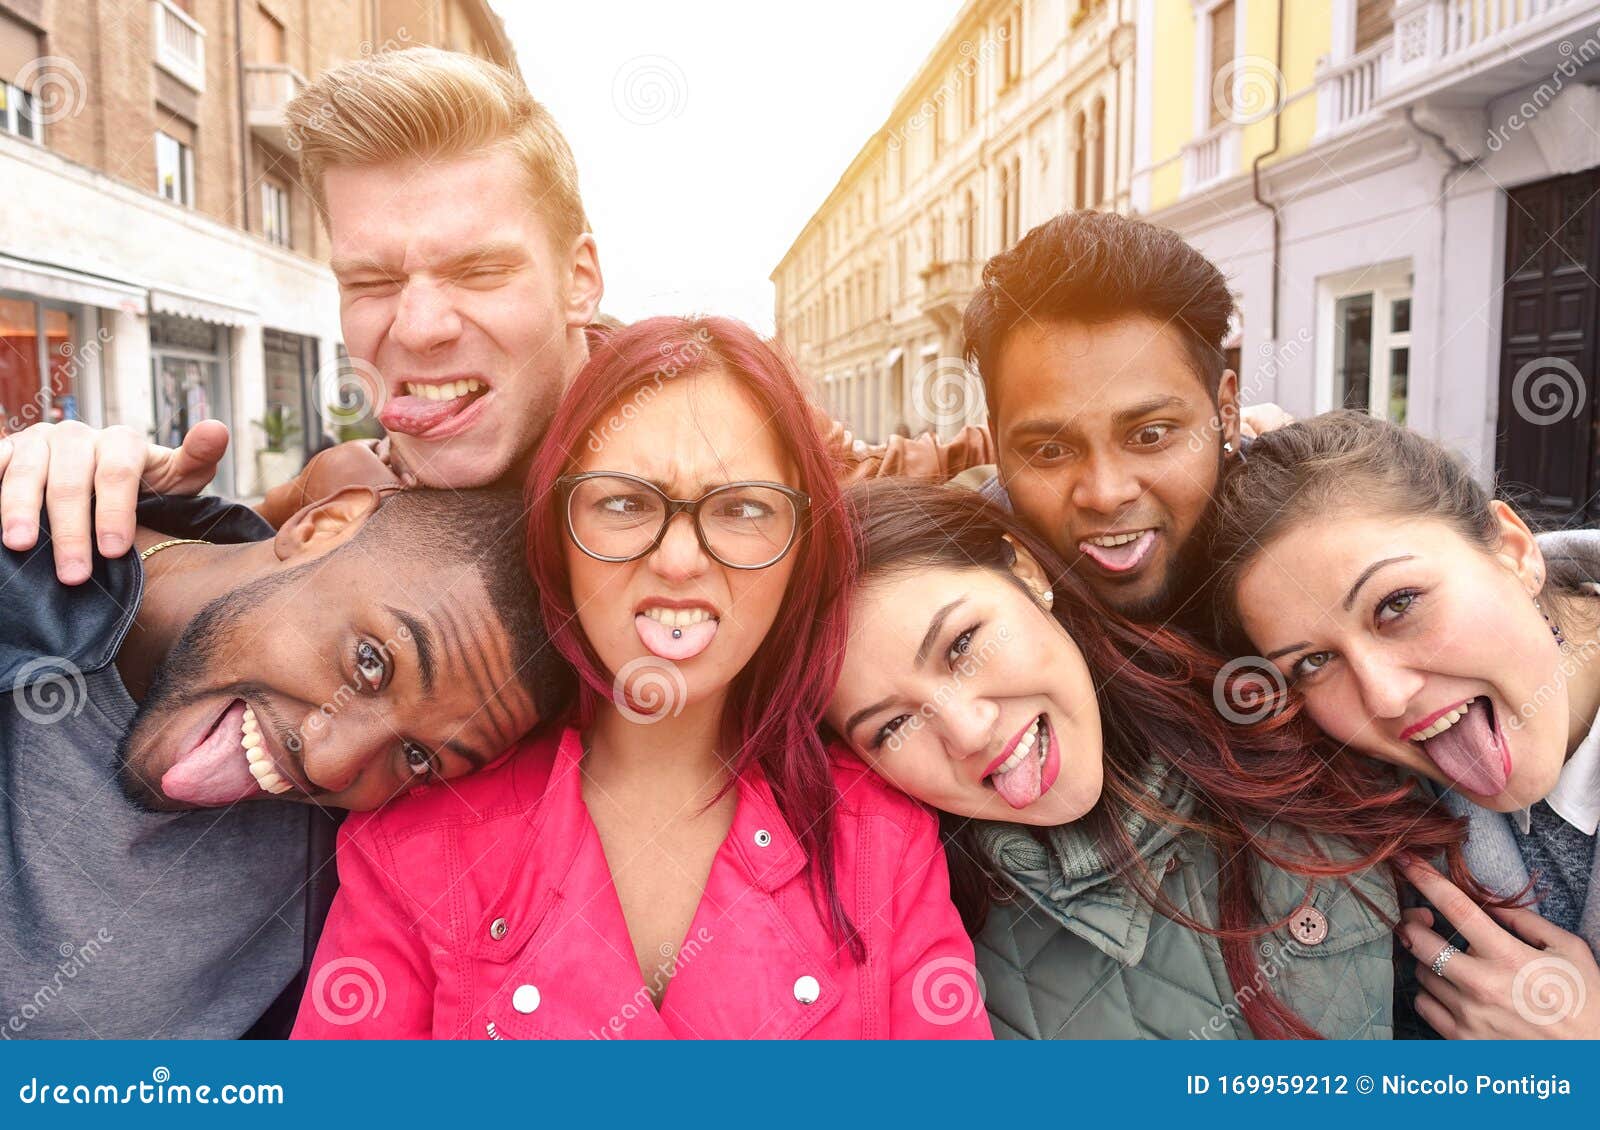 Multiracial Best Friends Taking Selfie Outdoors In Urban Contest Happy Young People Having Fun 